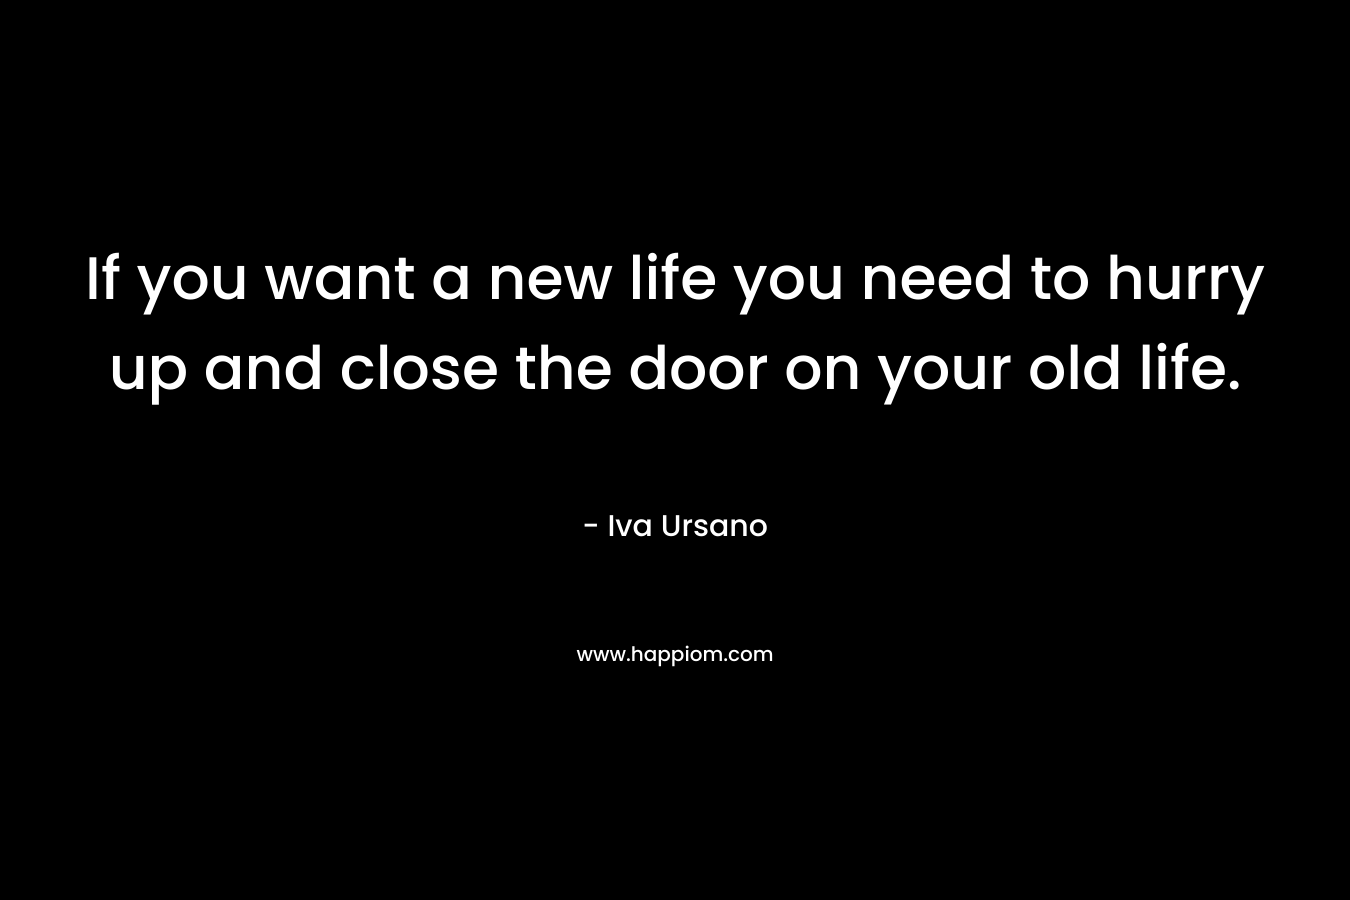 If you want a new life you need to hurry up and close the door on your old life. – Iva Ursano